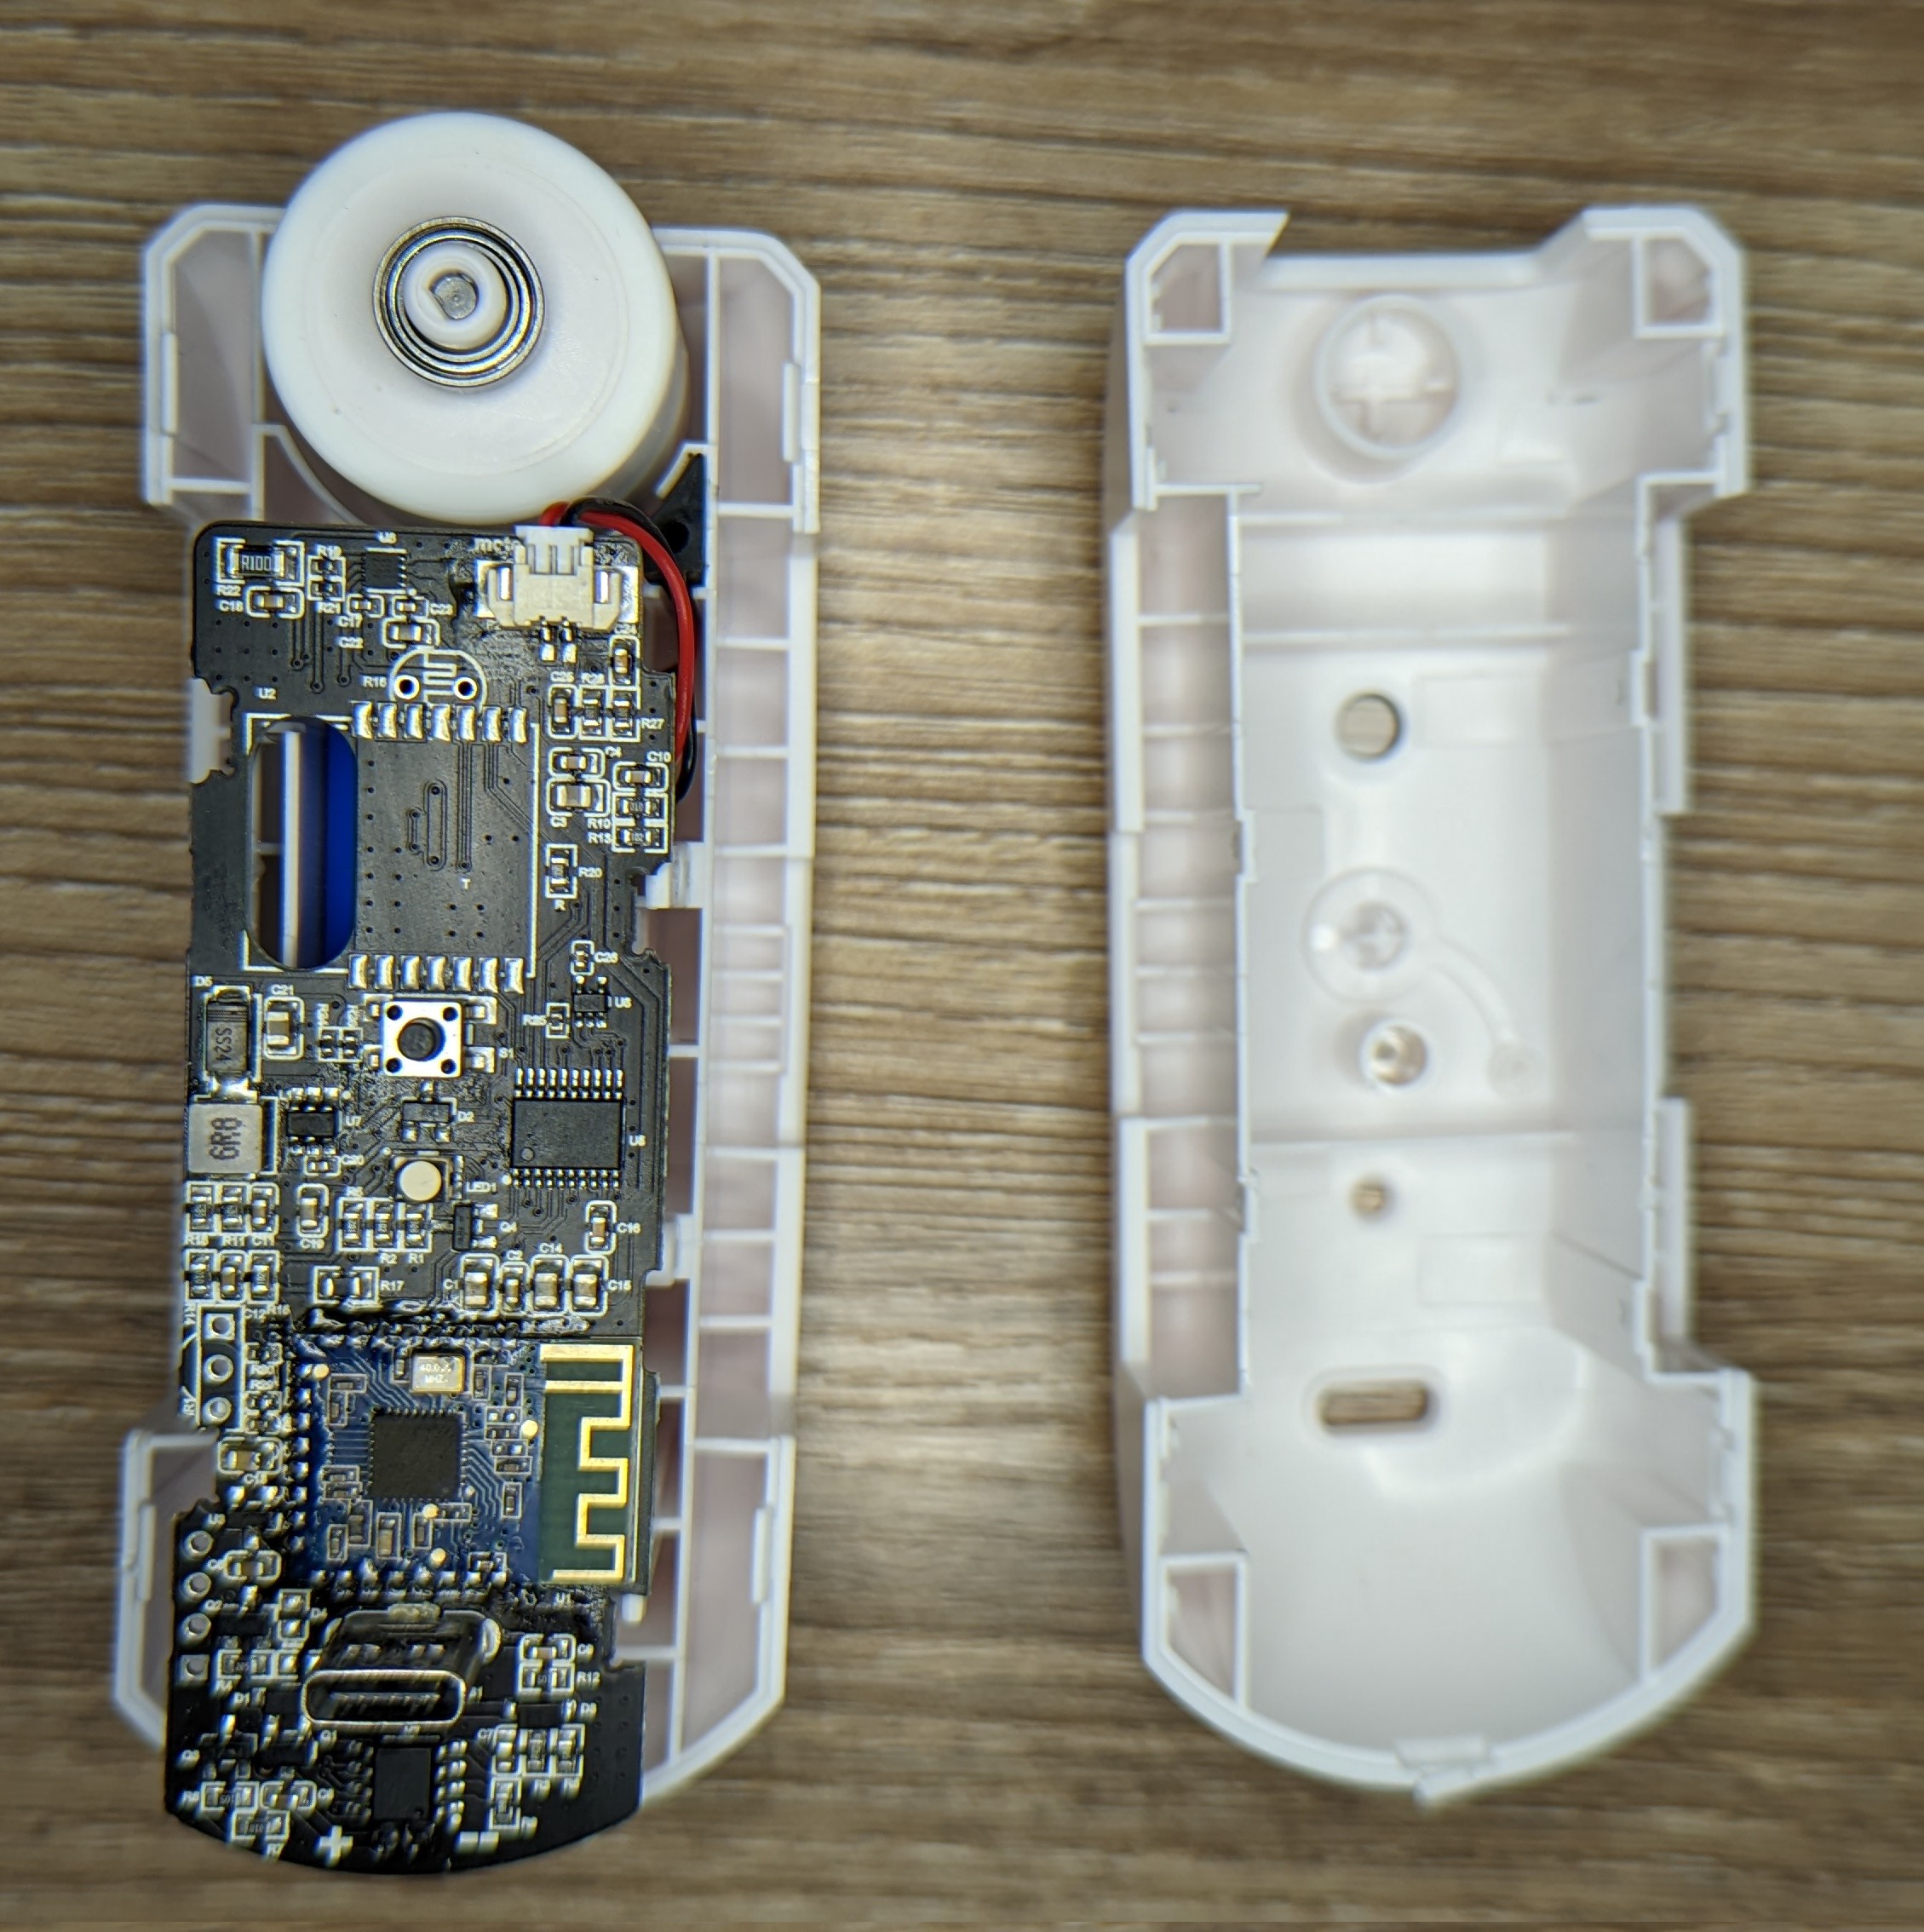 Photo showing the internals of a robot. A fairly sophisticated PCB is visible.